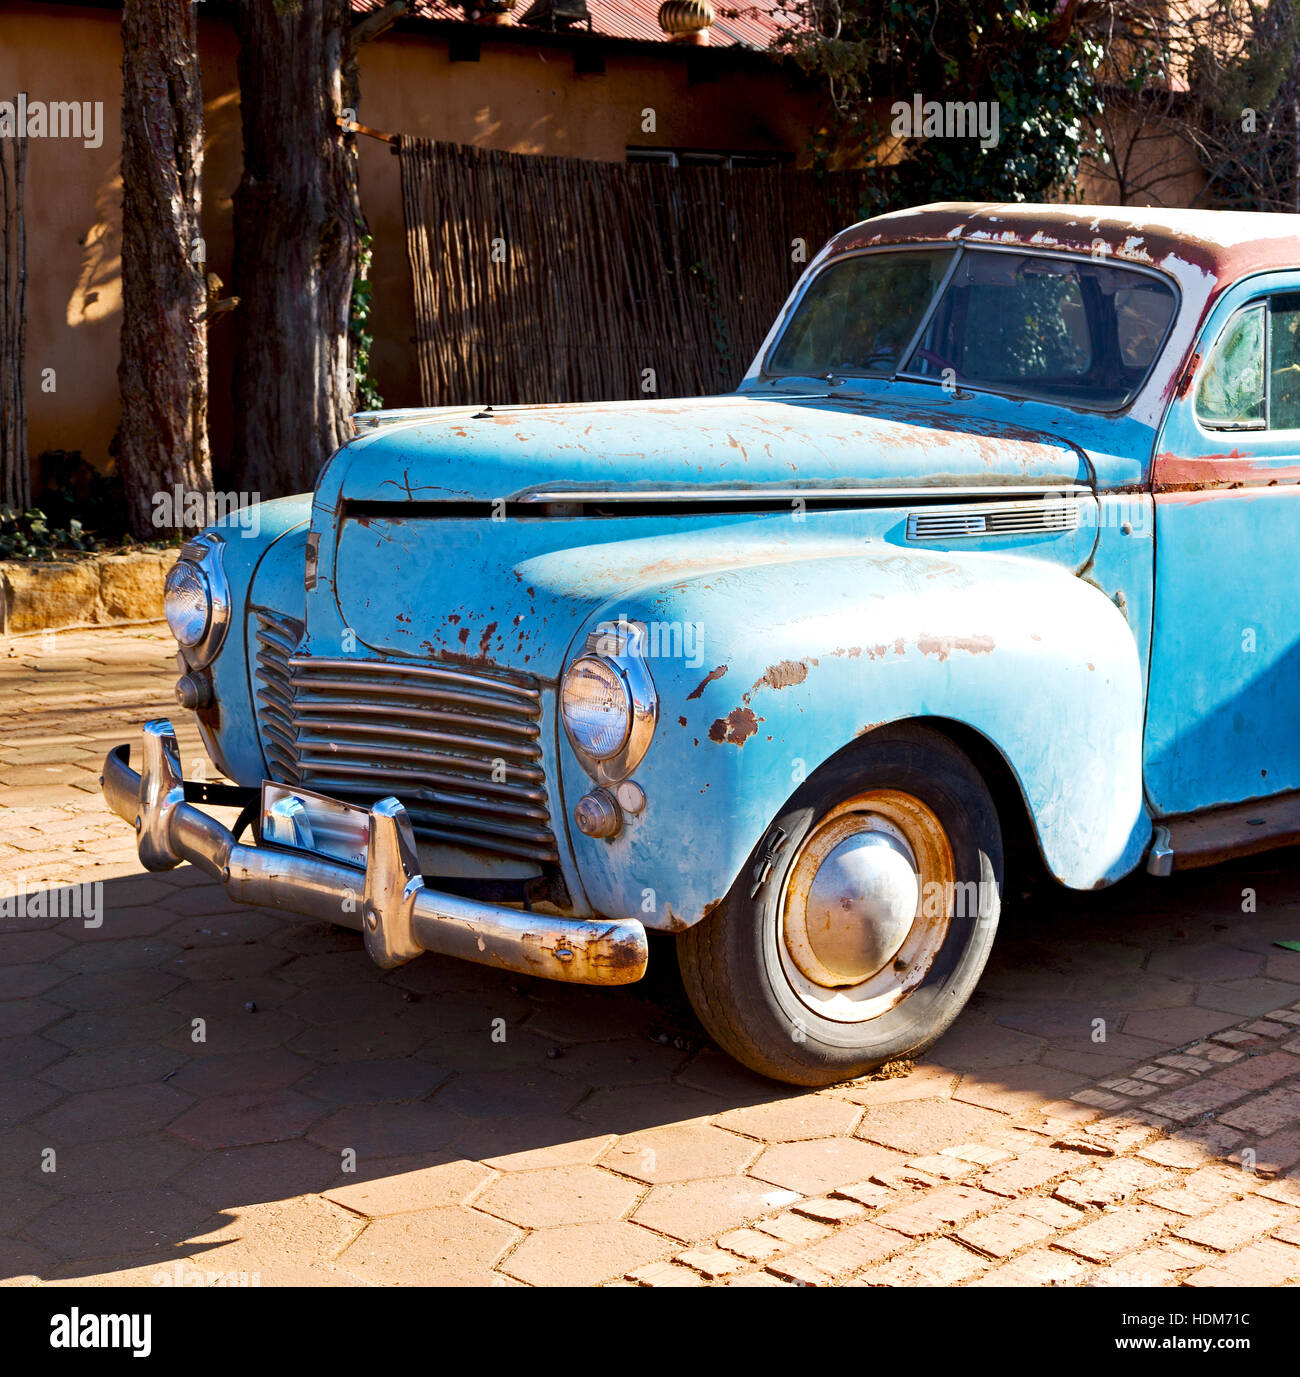 in south africa old abandoned american vintage car and  the house courtyard Stock Photo